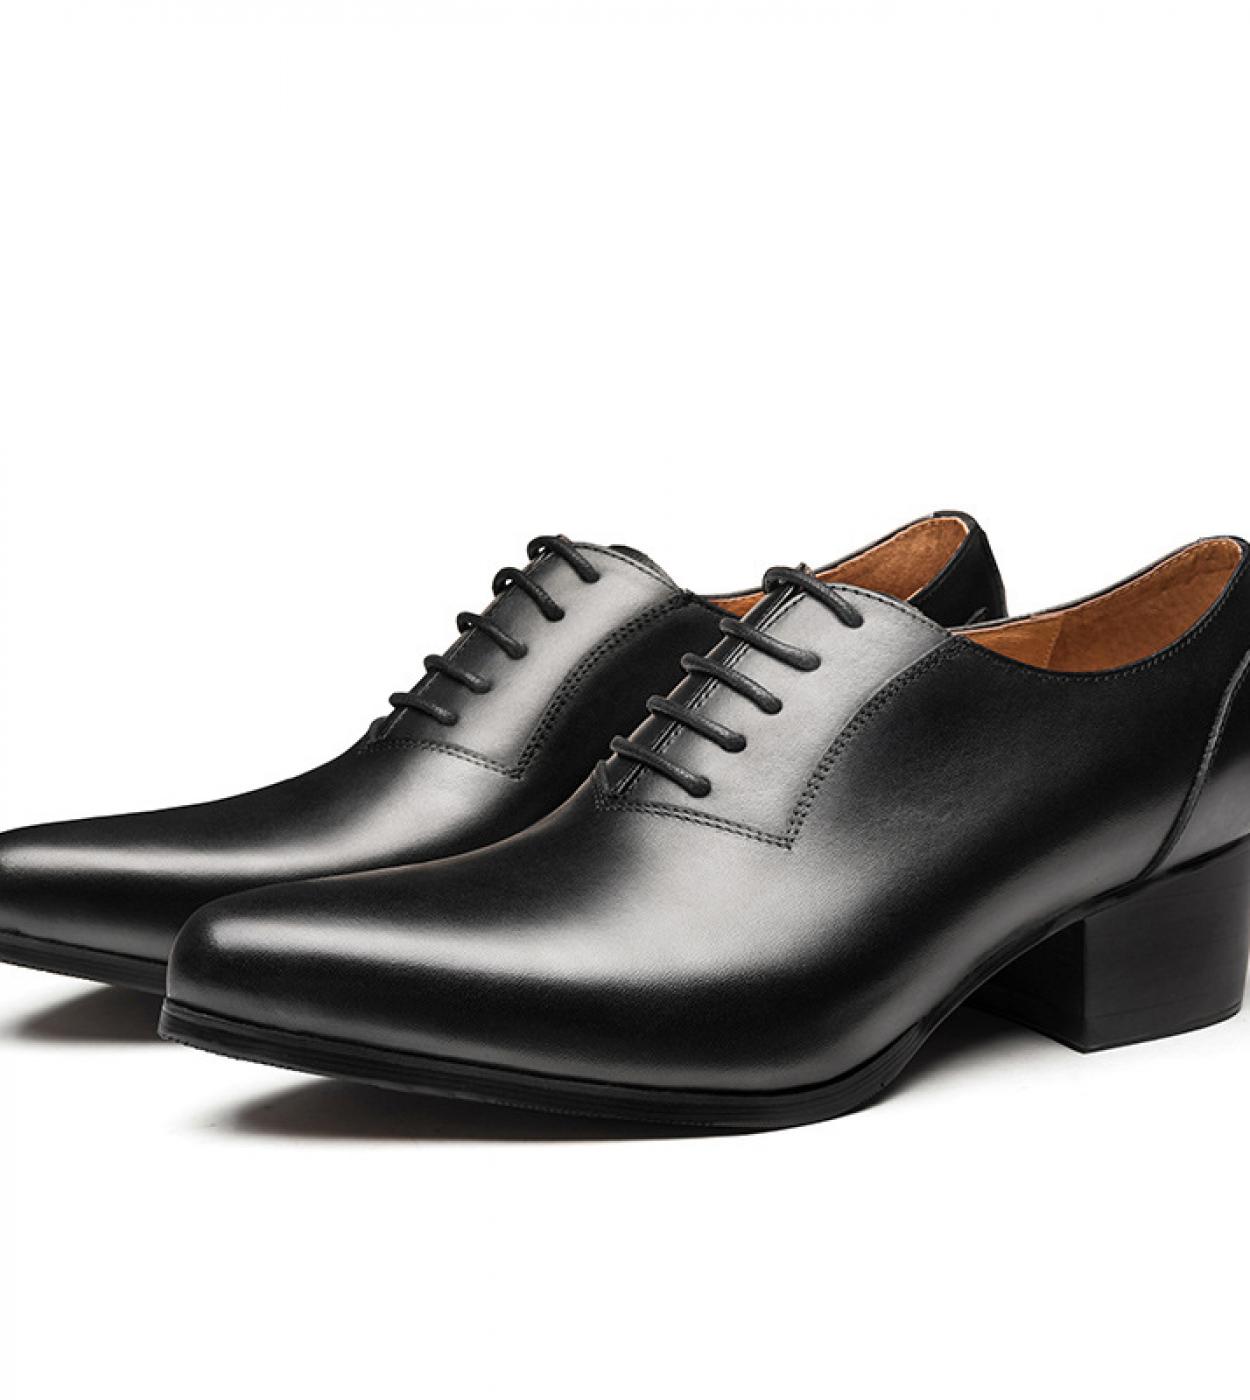 Buy Leather Formal Oxford Shoes for Men |Leather with Lace Formals Leather  Formal Shoes Men| Derby Shoes for Men Leather (Black, Size 6) at Amazon.in